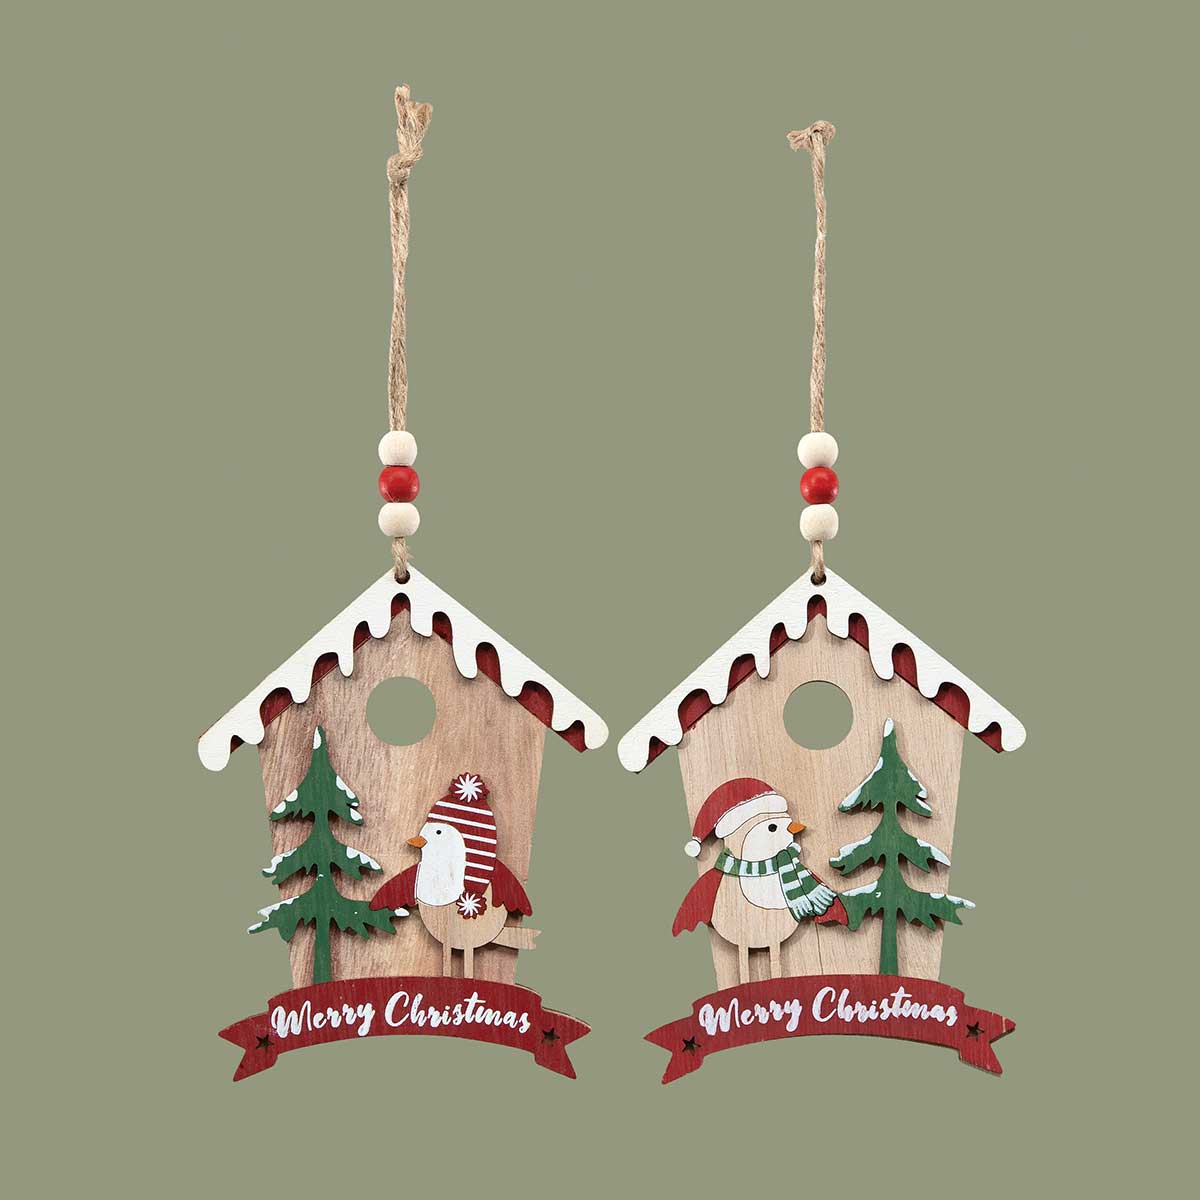 ORNAMENT BIRDHOUSE 2 ASSORTED 3.75IN X 5IN WOOD - Click Image to Close